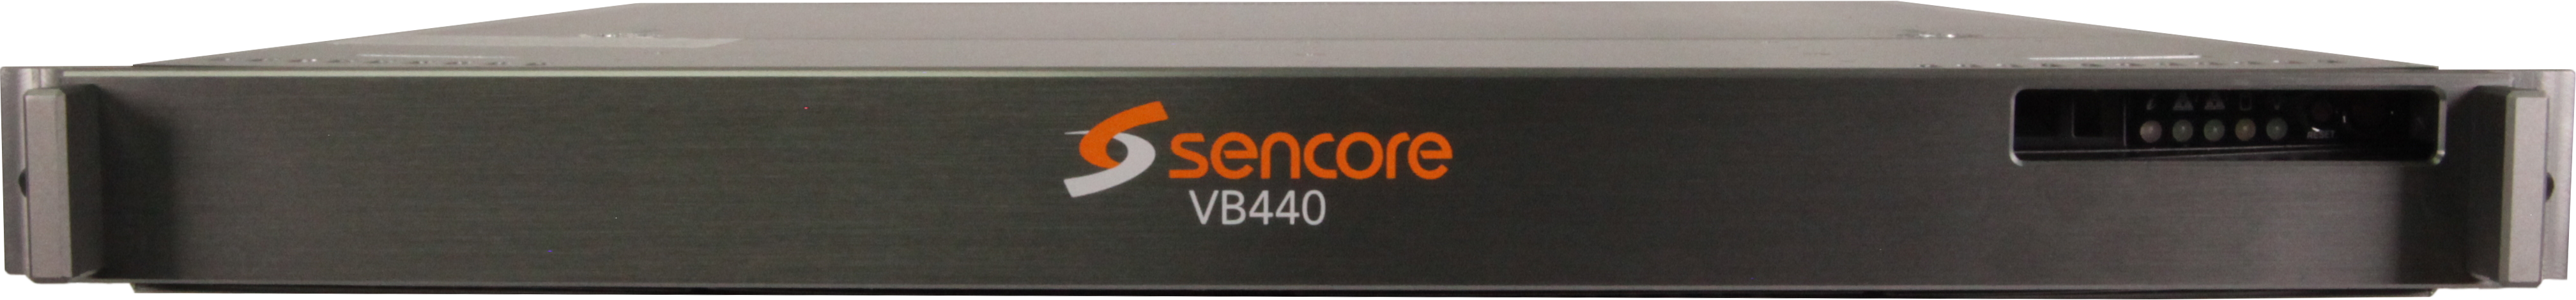 Advancements Made to Sencore's VB440 - Uncompressed Video Over IP Monitoring Appliance